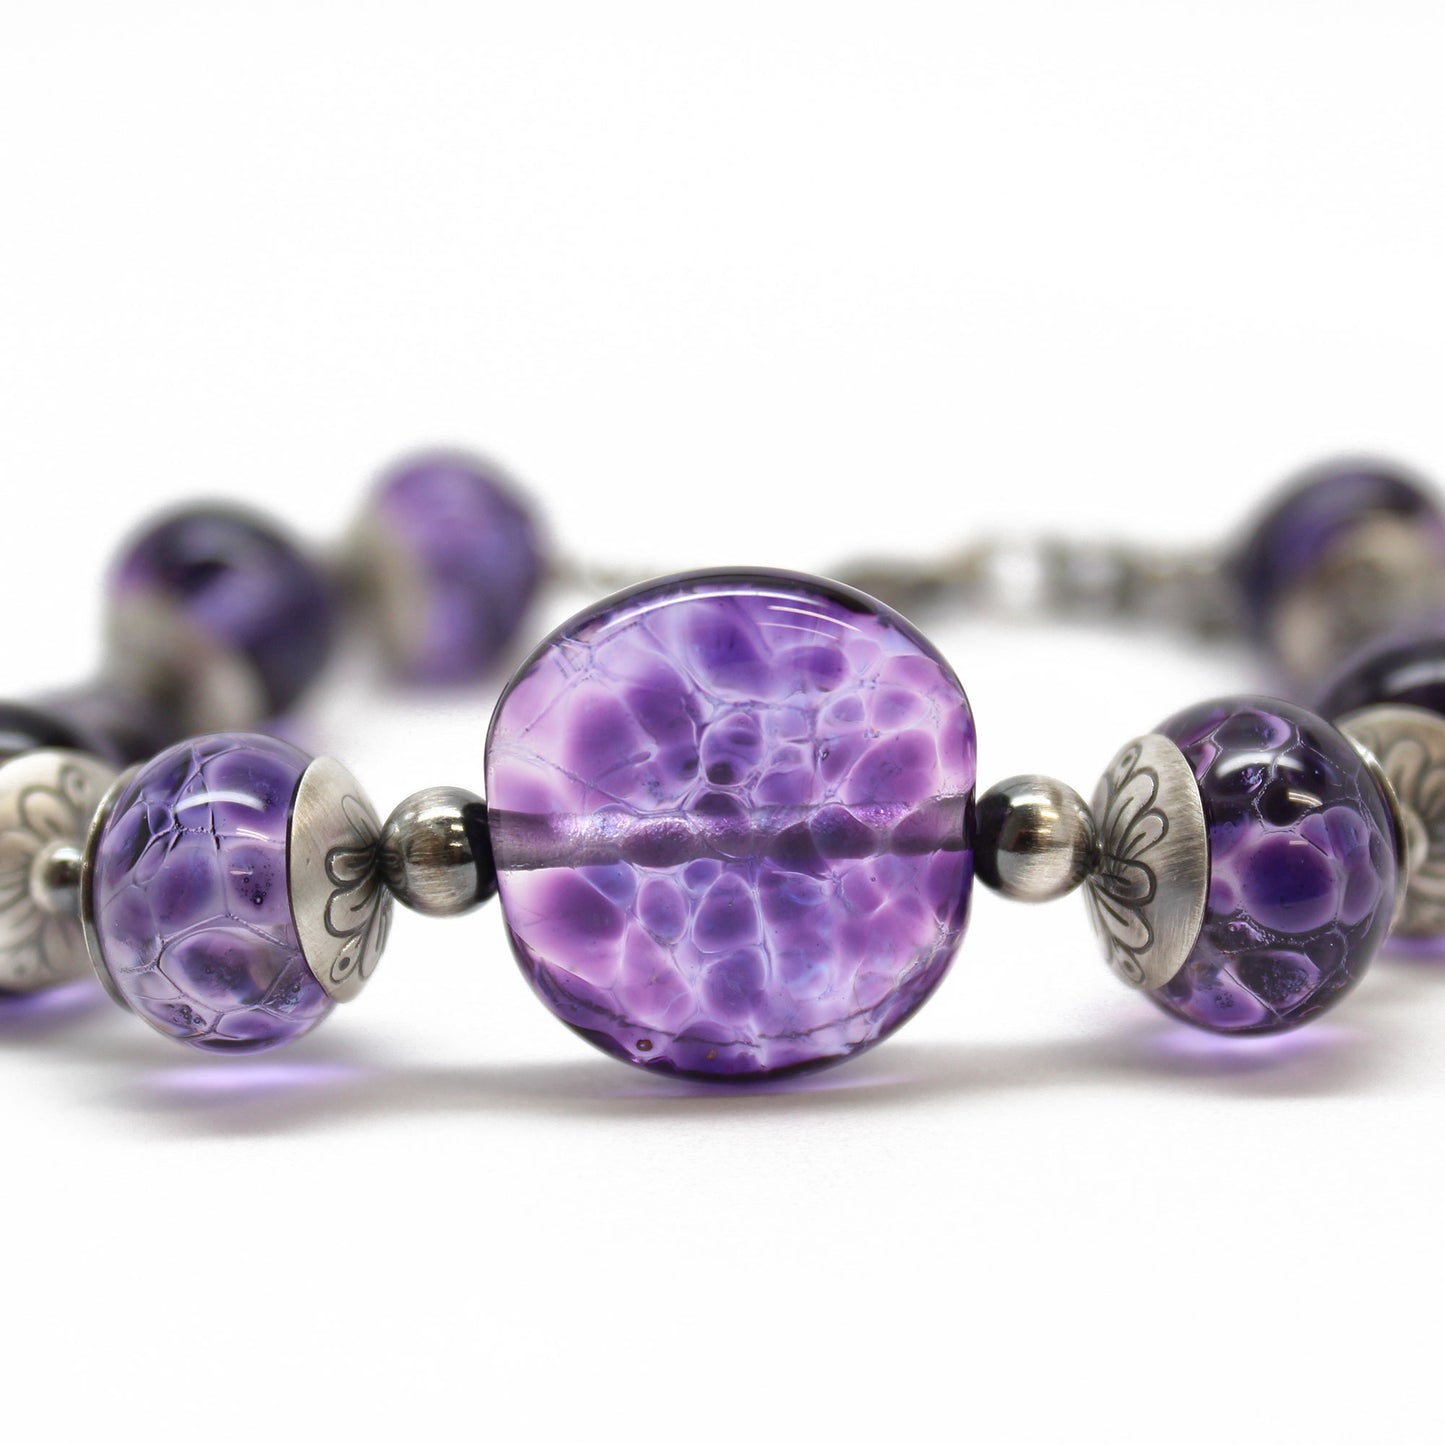 Load image into Gallery viewer, Purple Lampwork Bead Bracelet in Sterling Silver, Adjustable 8 to 9.25 Inches
